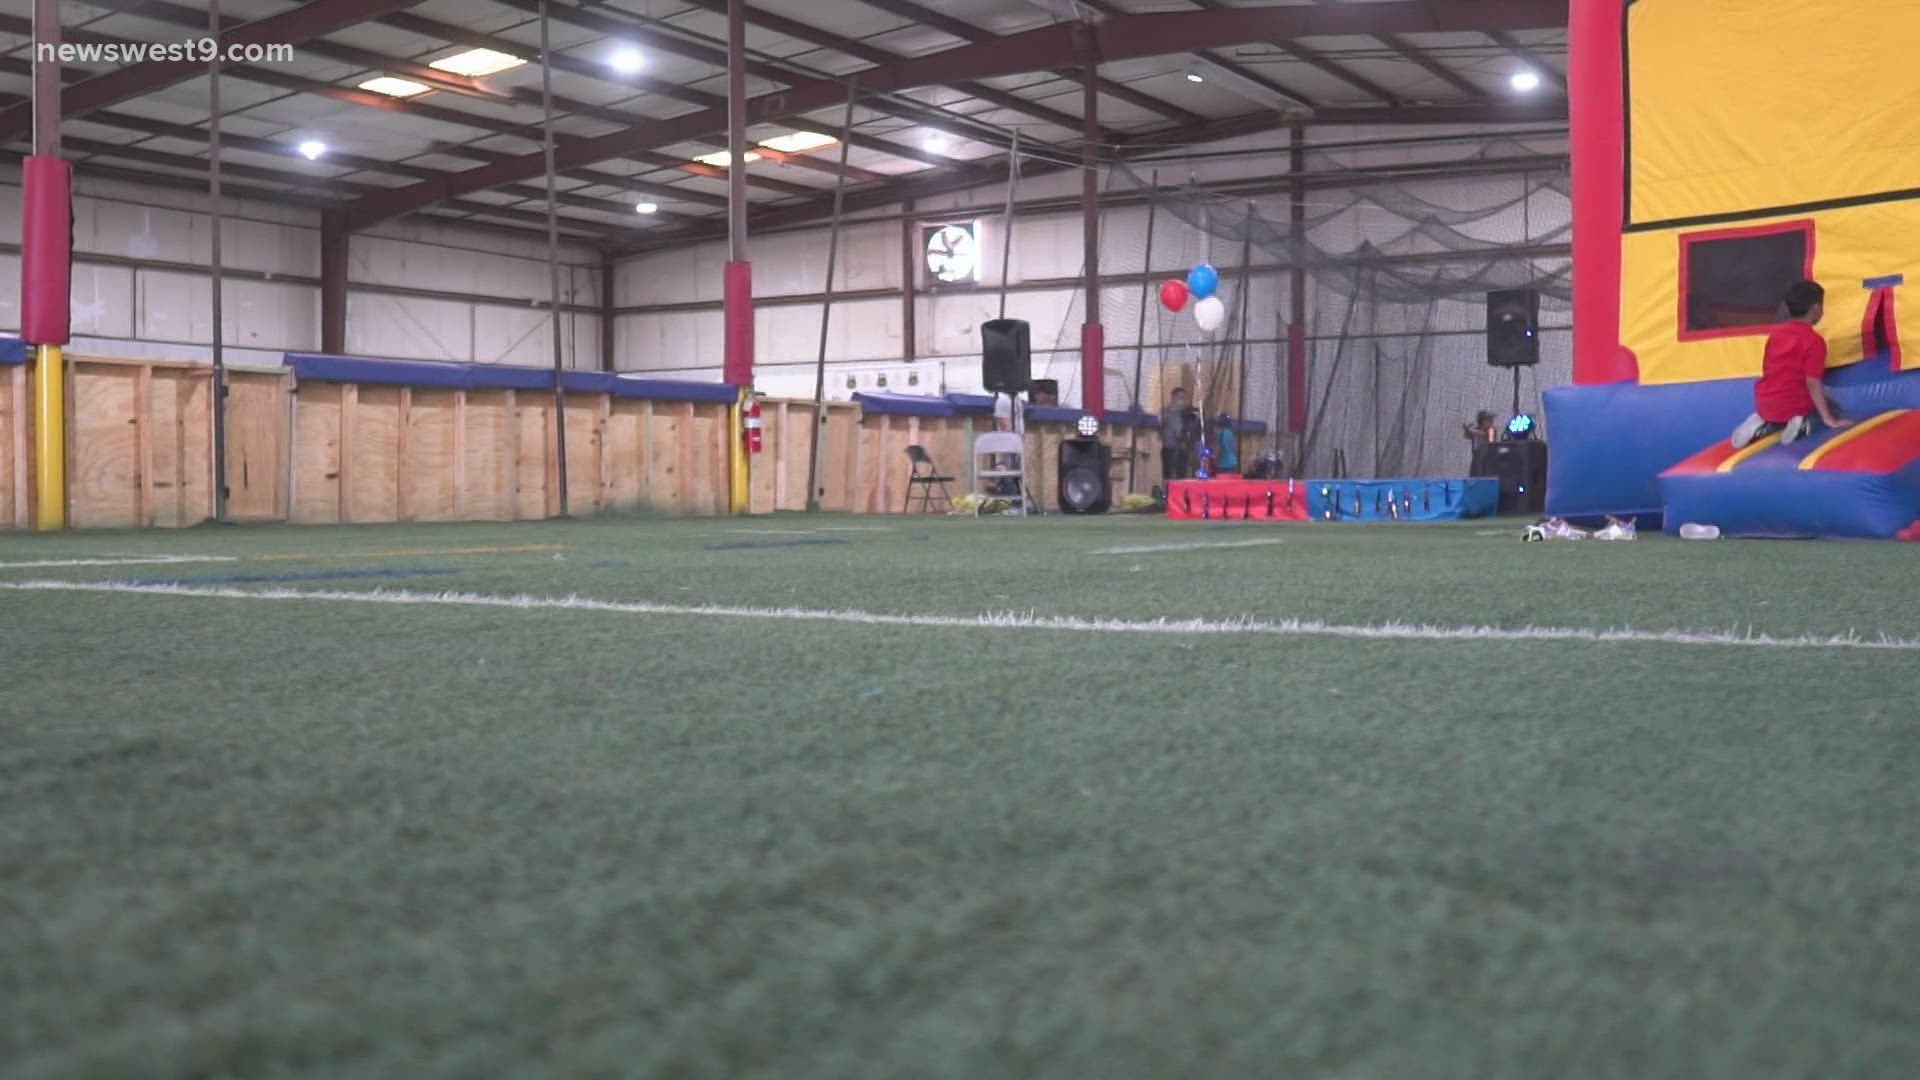 The West Texas Fieldhouse opened their doors on Saturday. The training facility has open turf, indoor soccer, batting cages, mini sports camps, and so much more.